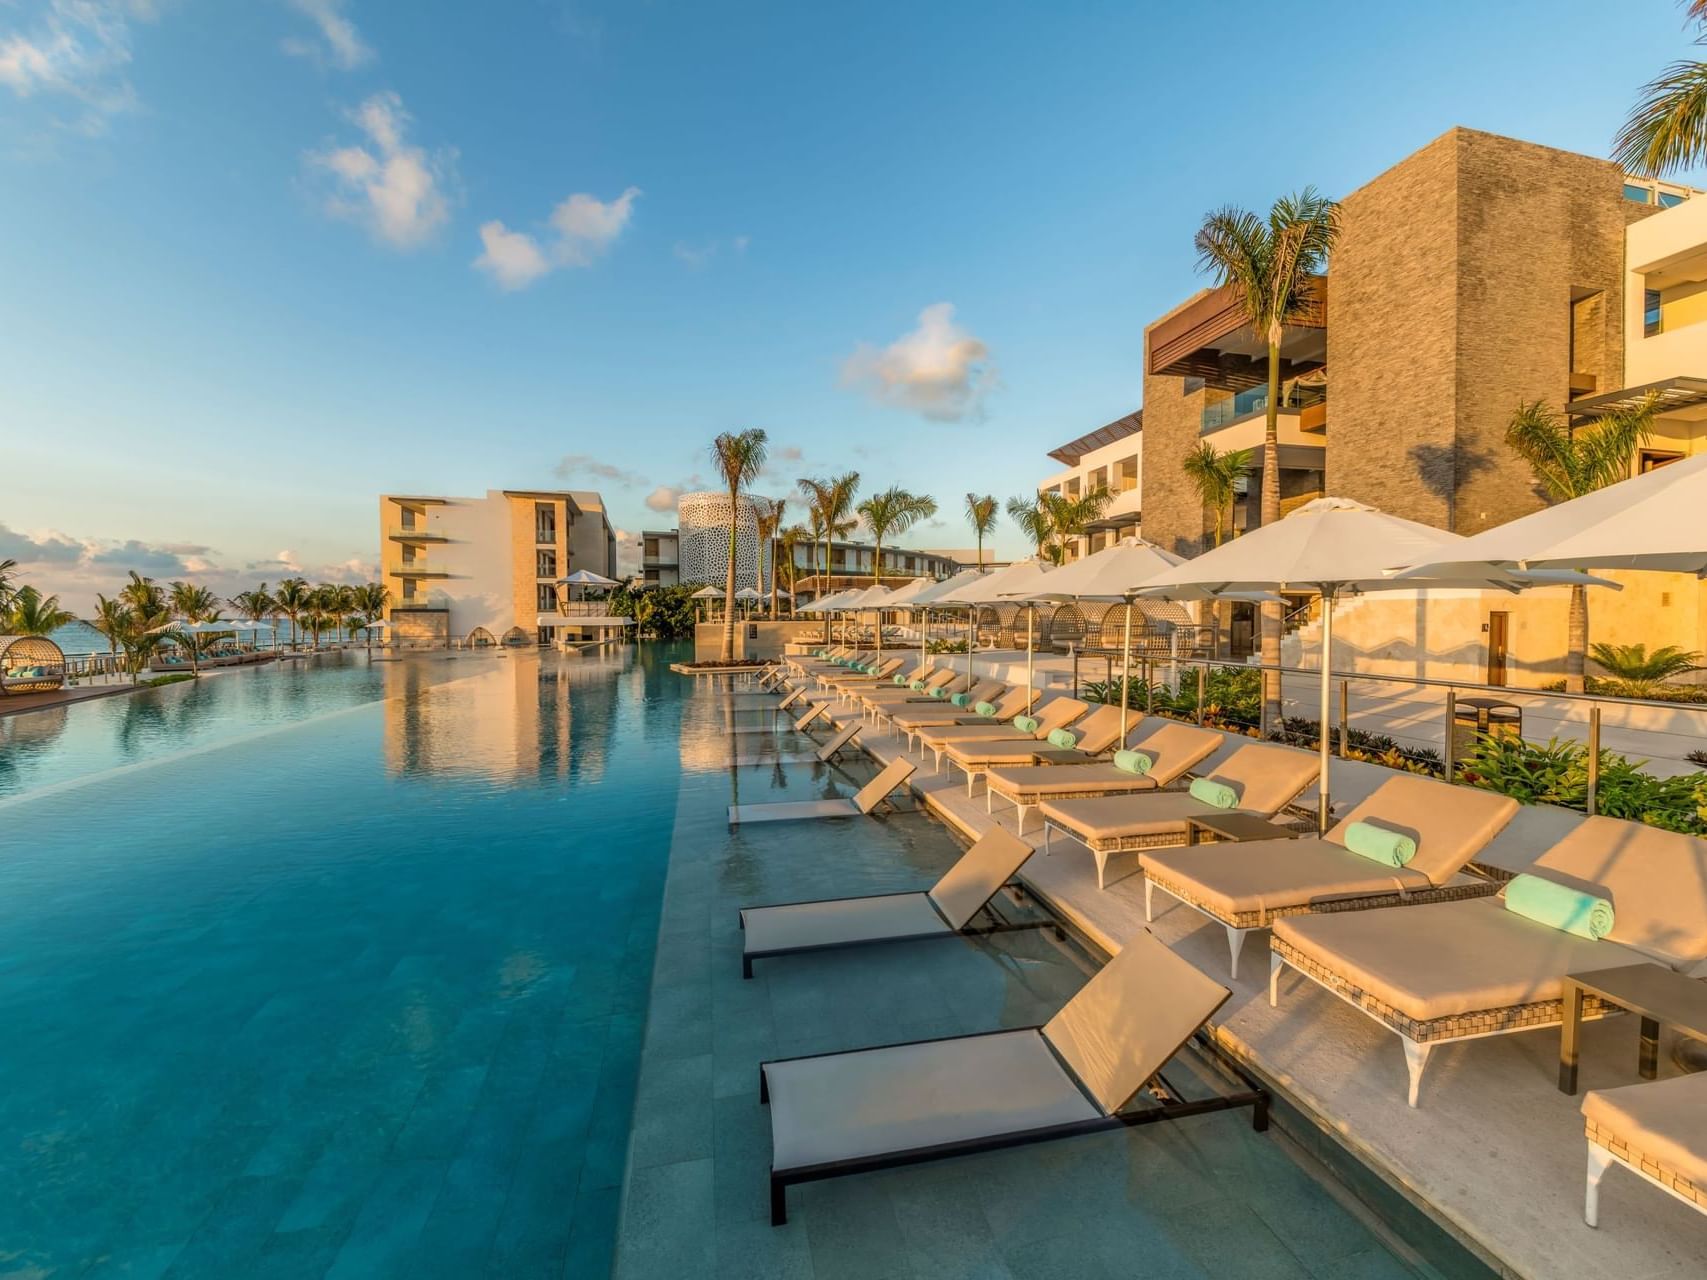 Sunloungers on the deck by the pool at Haven Riviera Cancun